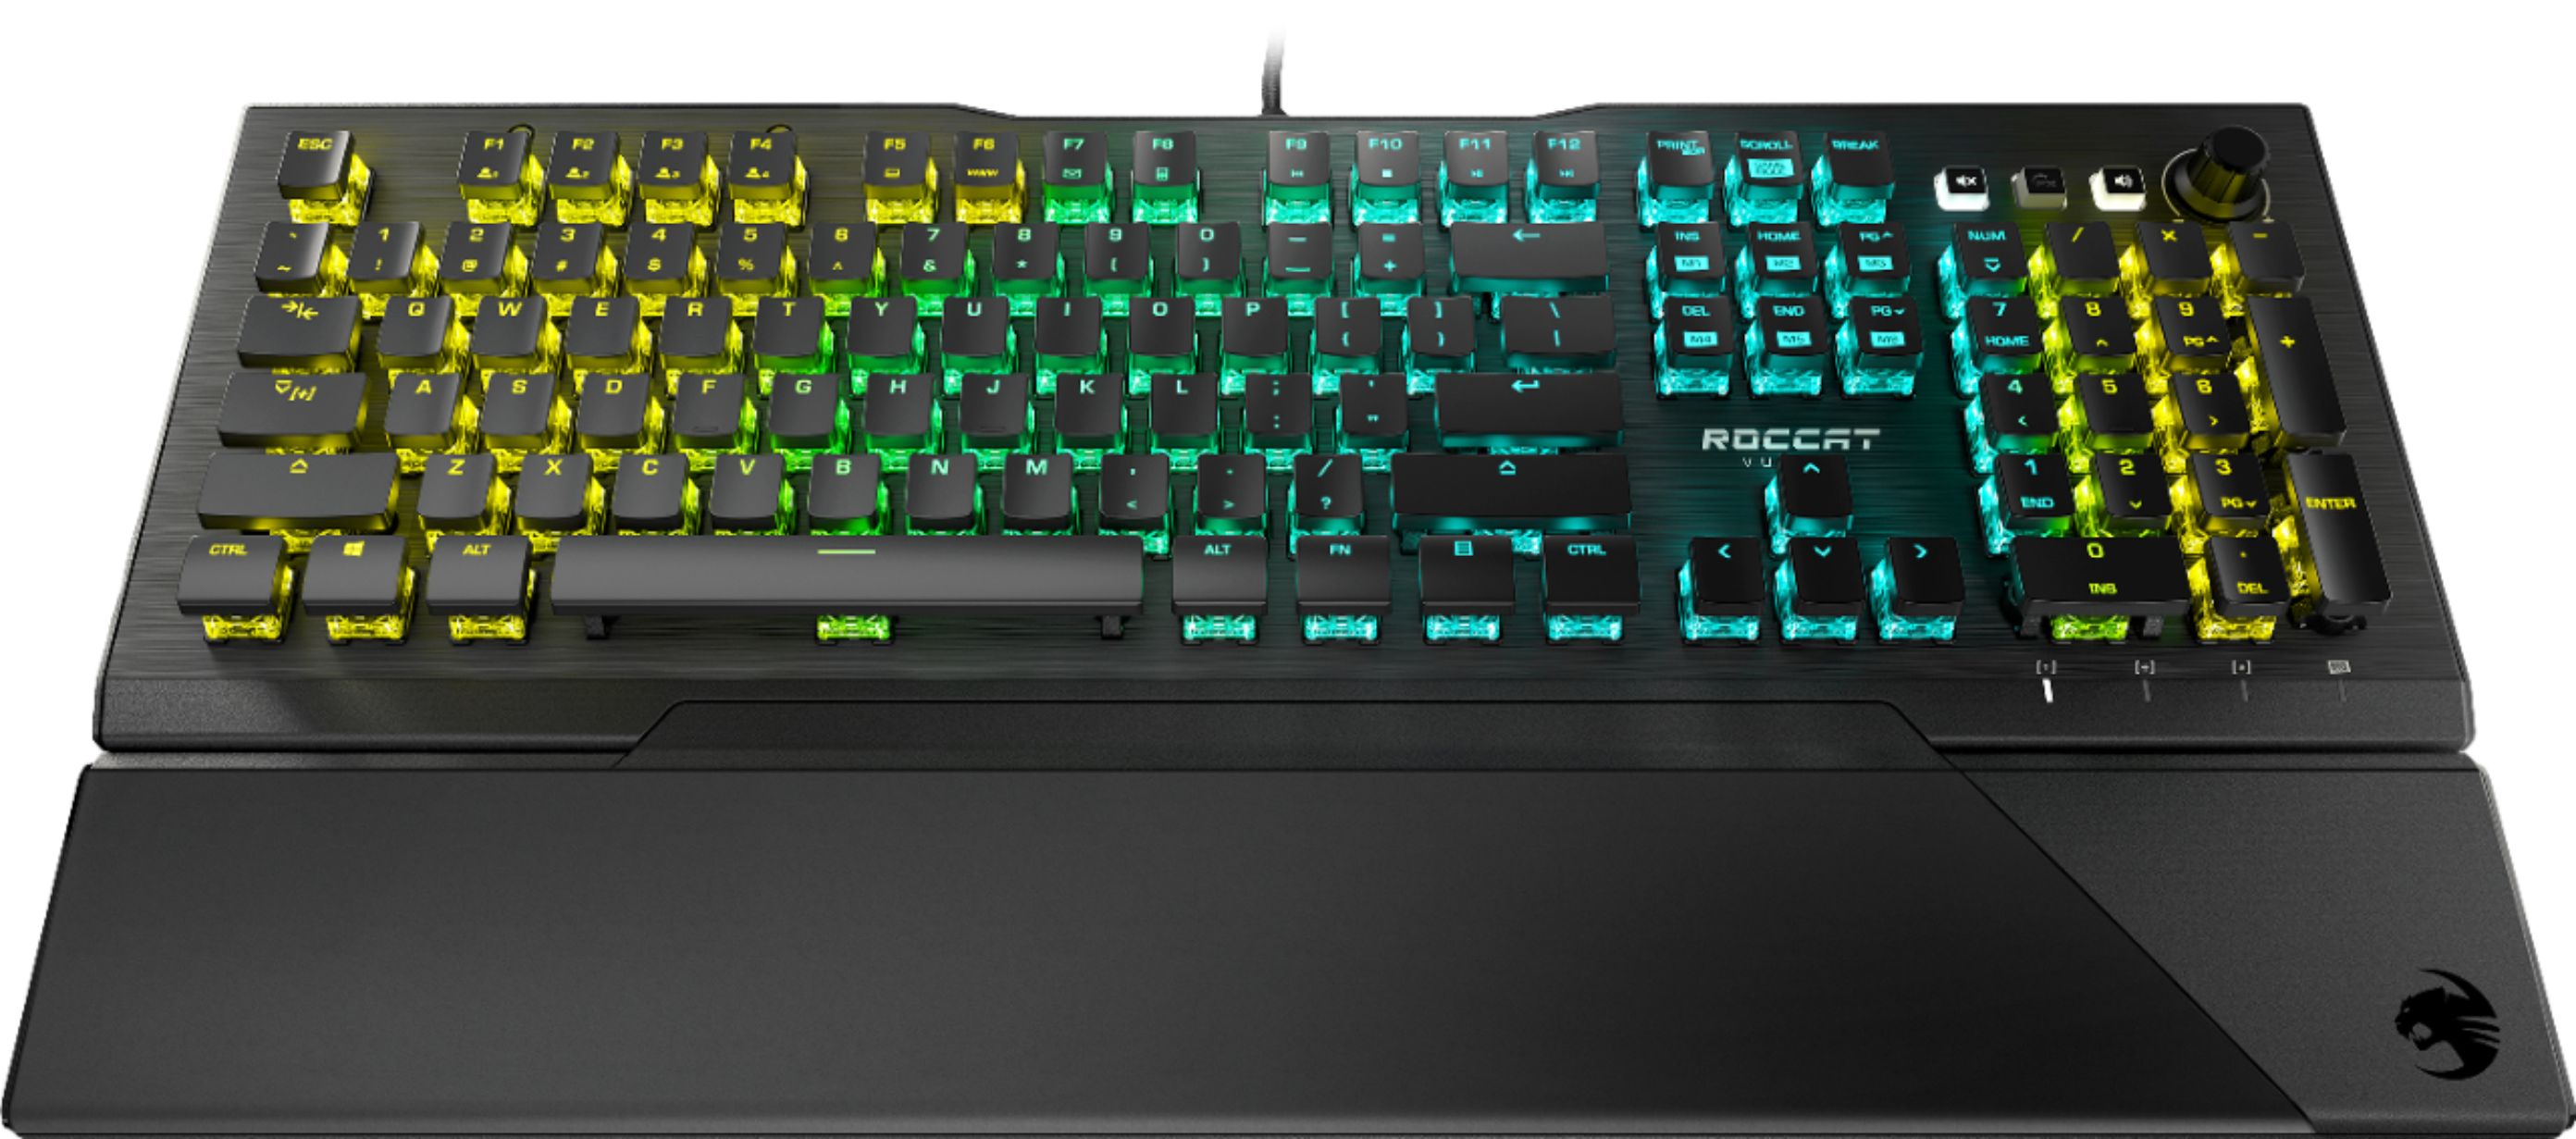 ROCCAT Vulcan Pro Full-size PC Gaming Keyboard with Linear Optical 